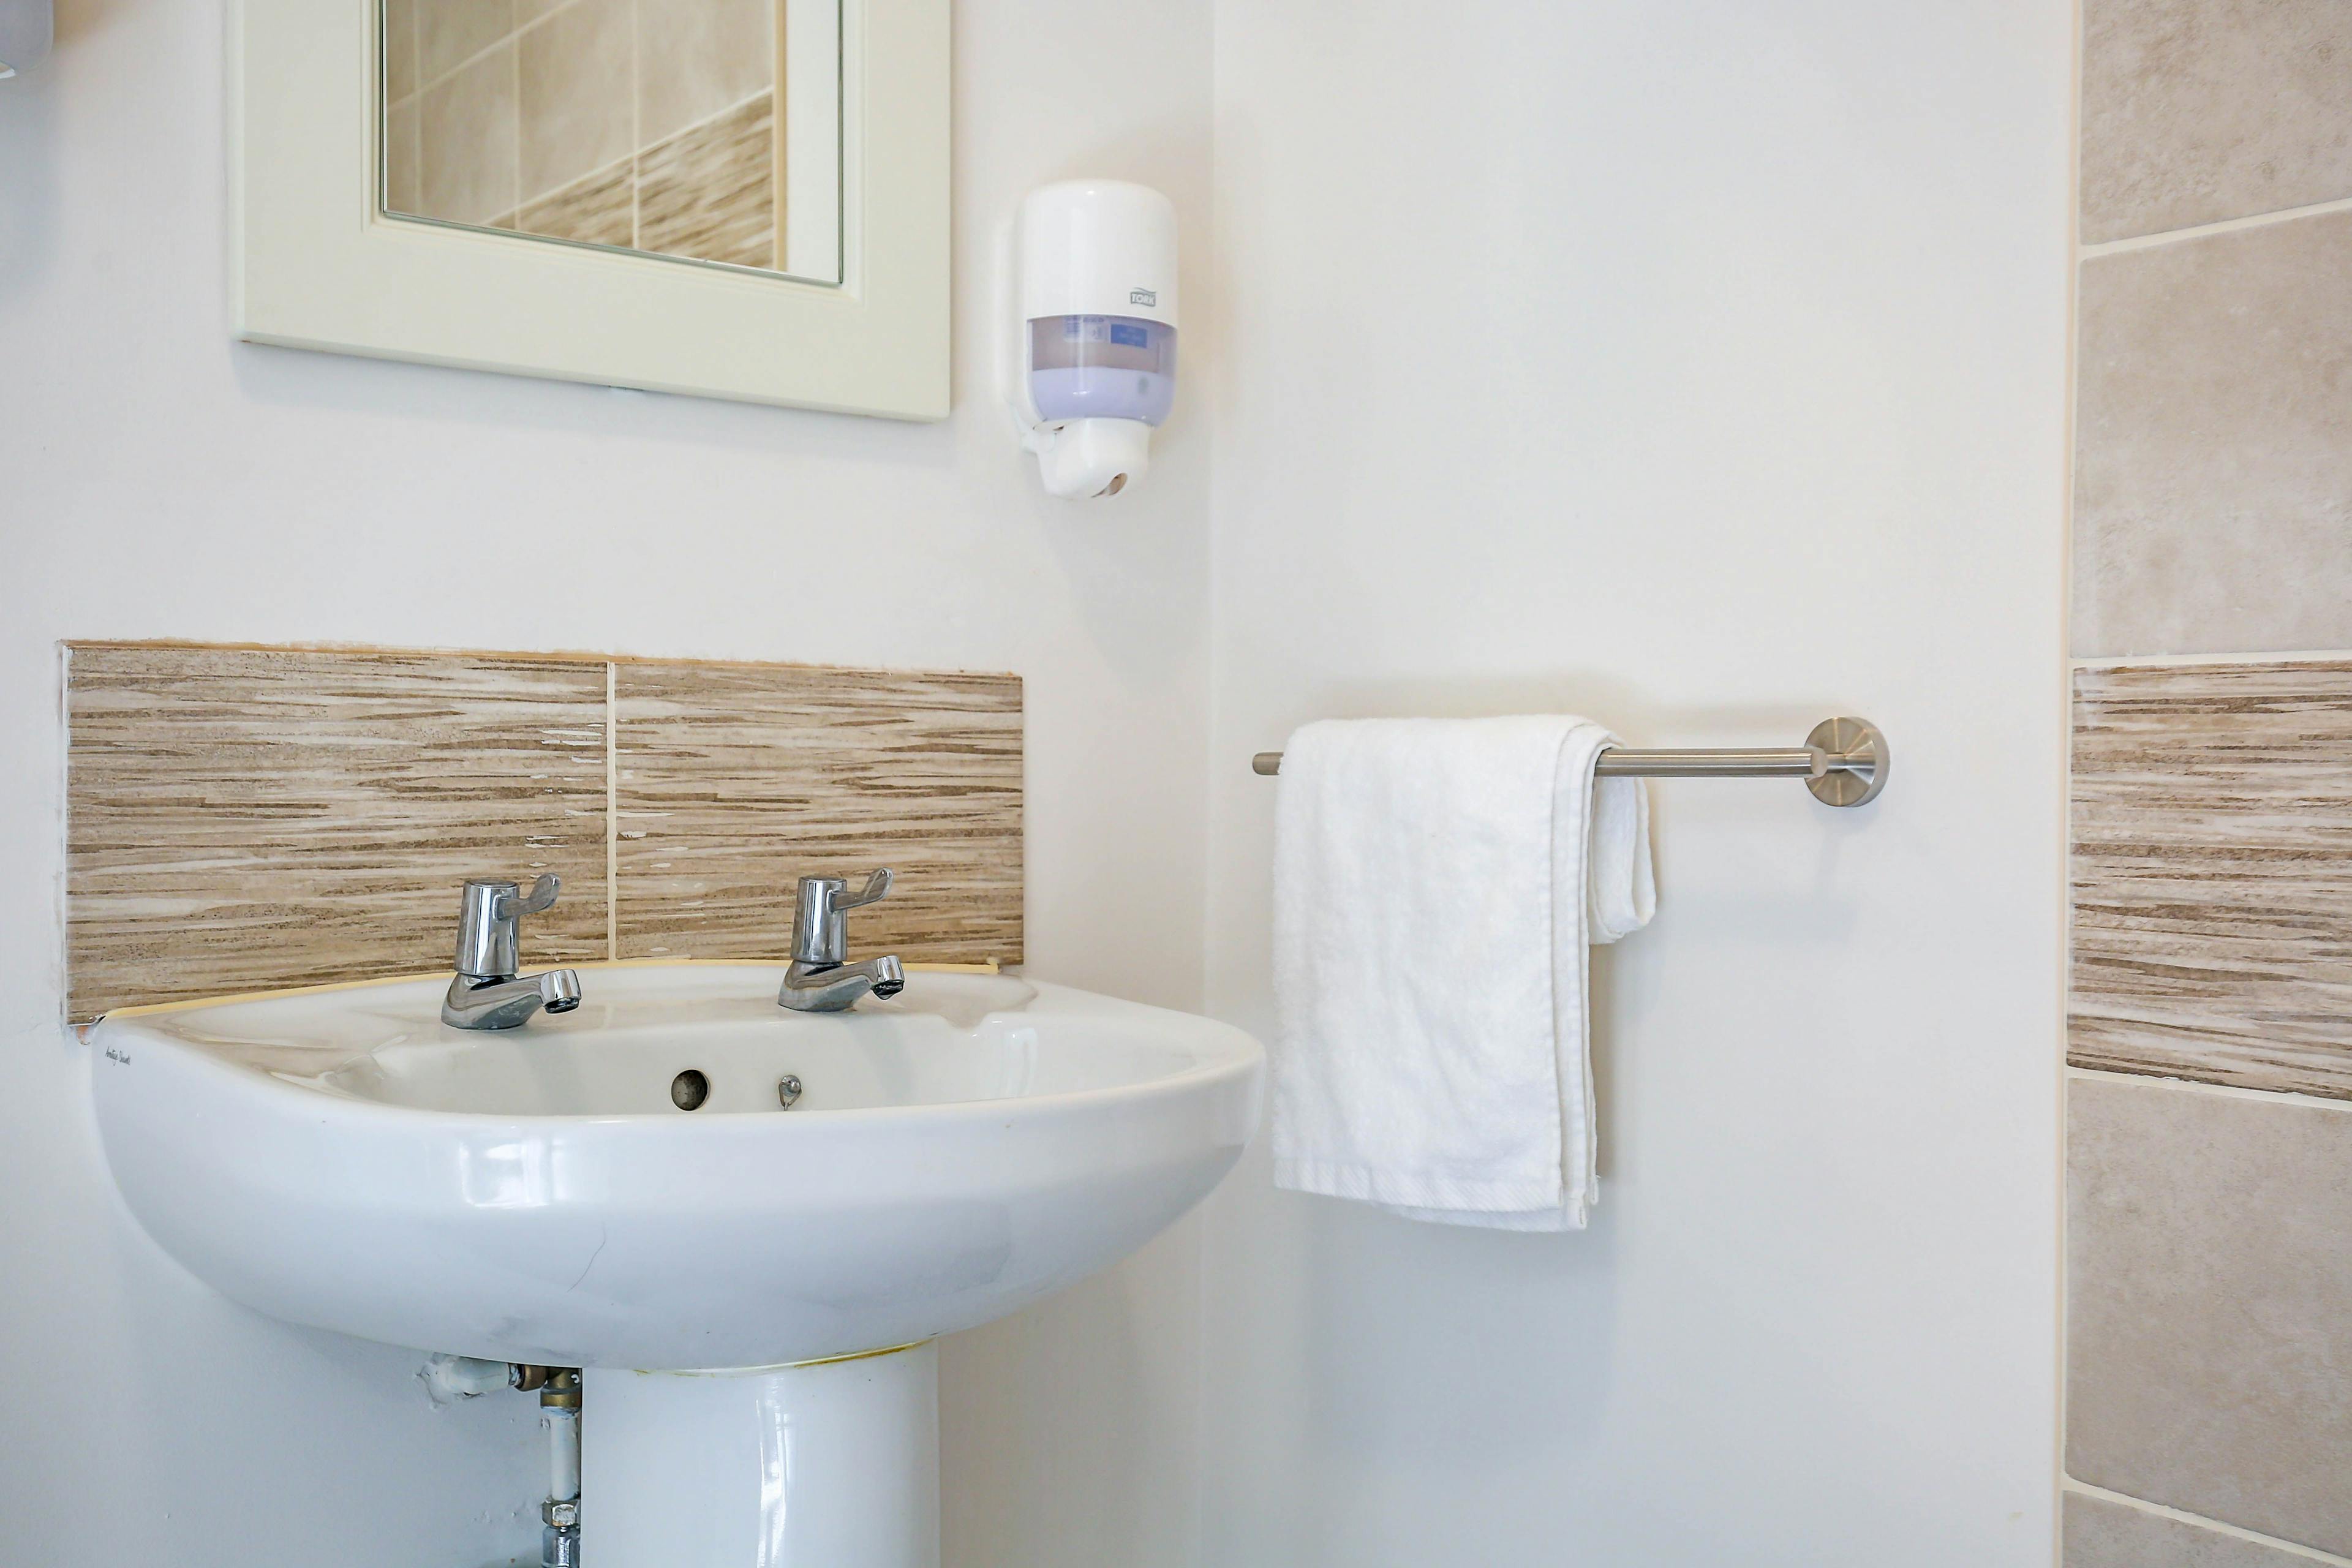 Bathroom at Station Court Care Home in Ashington, Northumberland